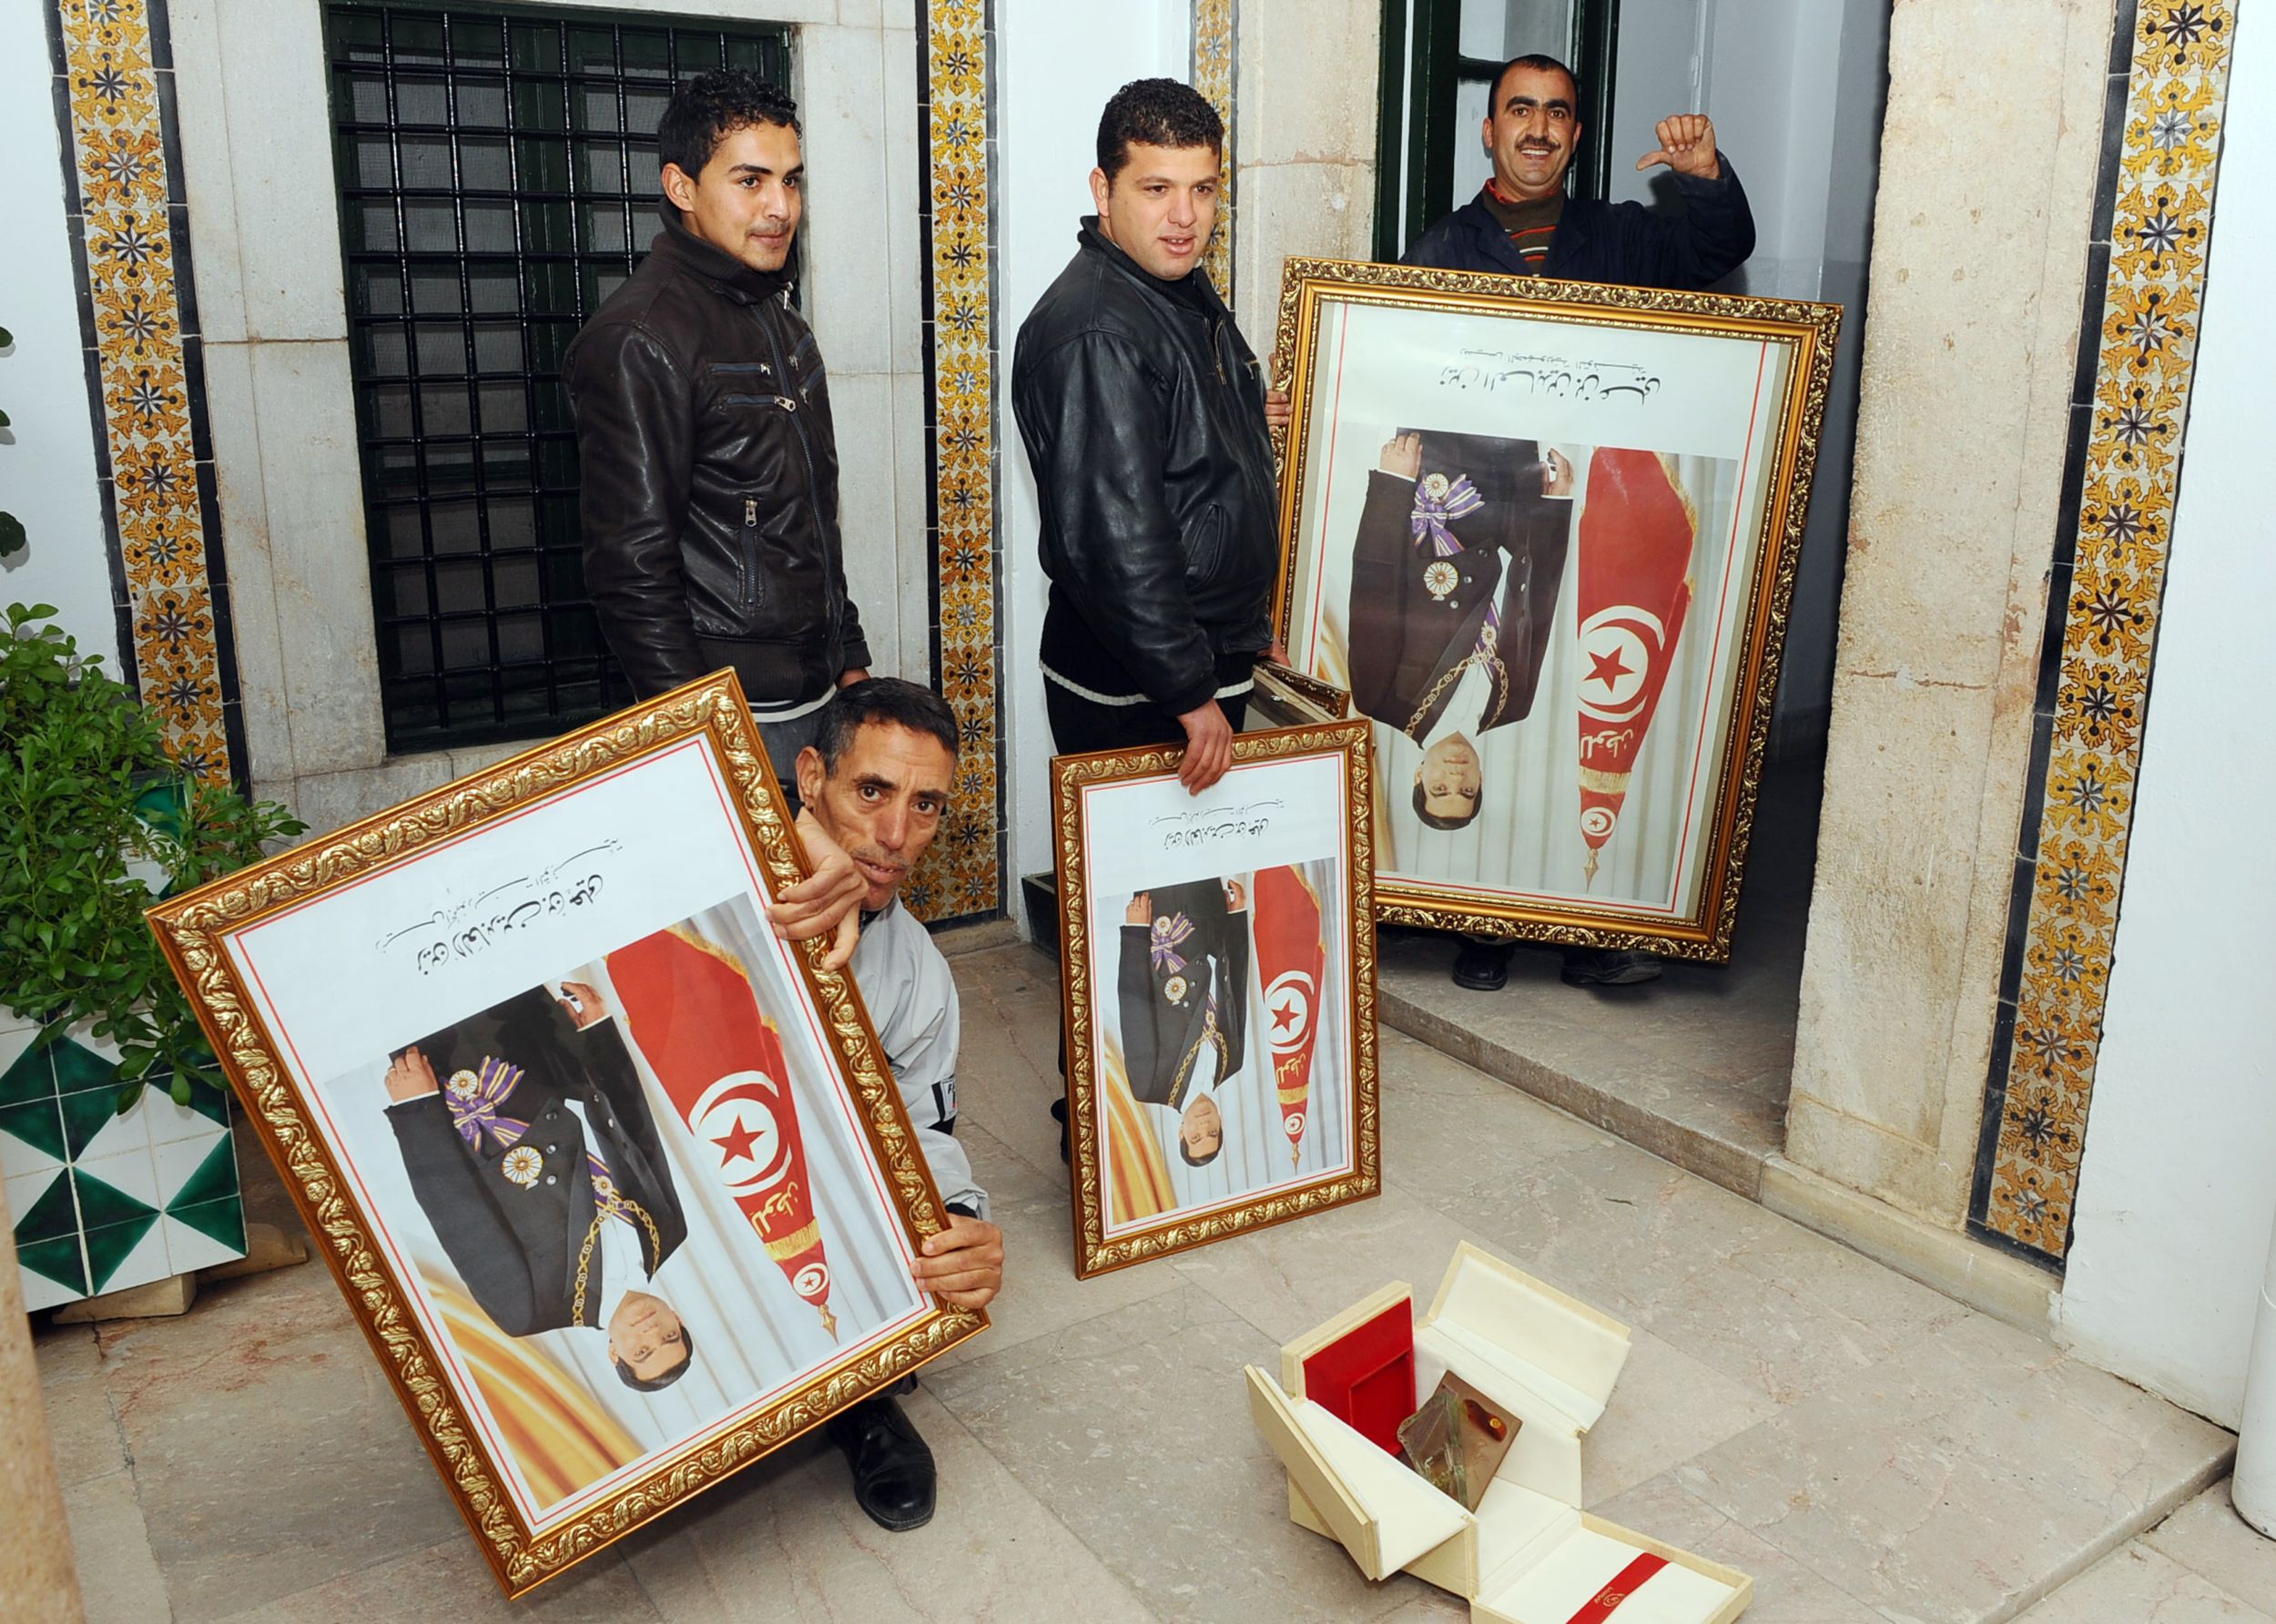 Tunisian employees of the Prime ministry remove portraits of Ben Ali on 17 January 2011, three days after he fled the country following a month of protests (AFP)